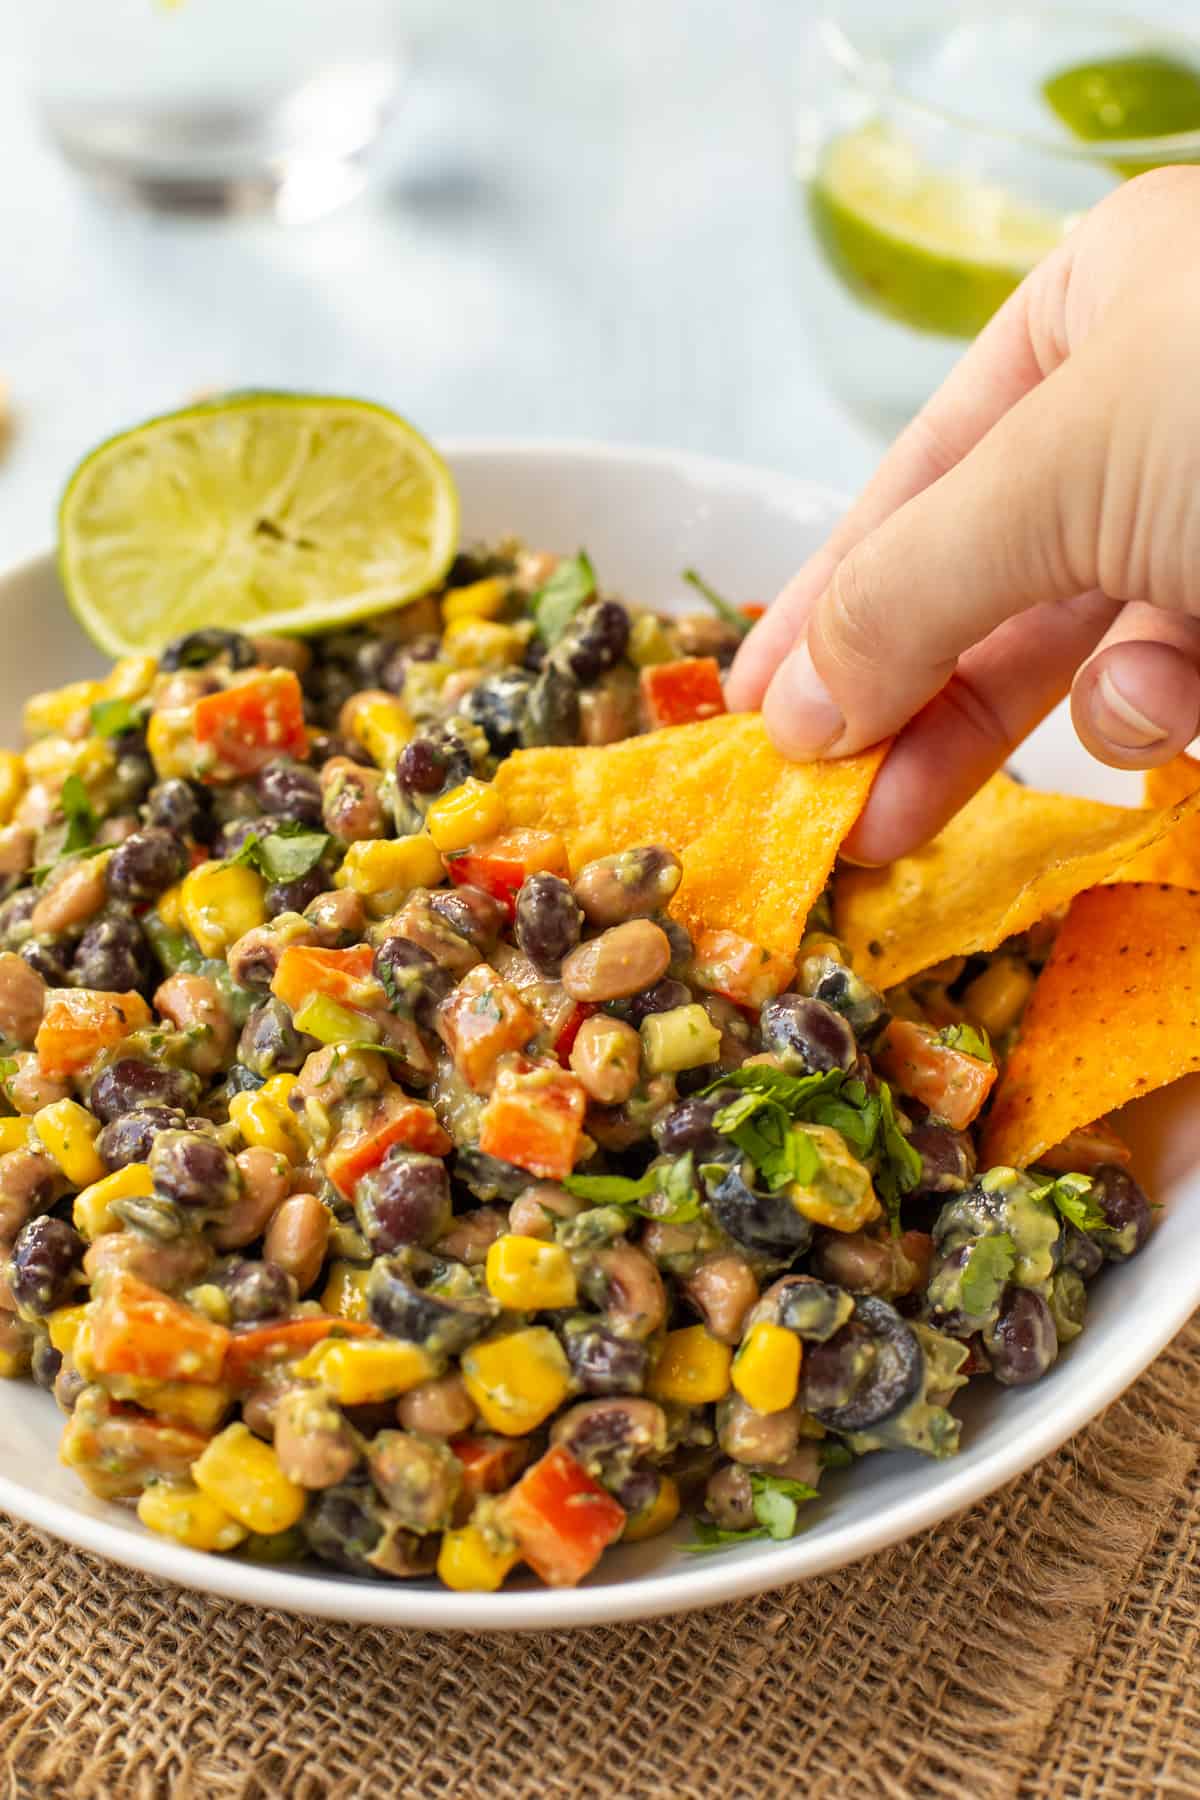 A hand using a tortilla chip to scoop up some cowboy caviar.